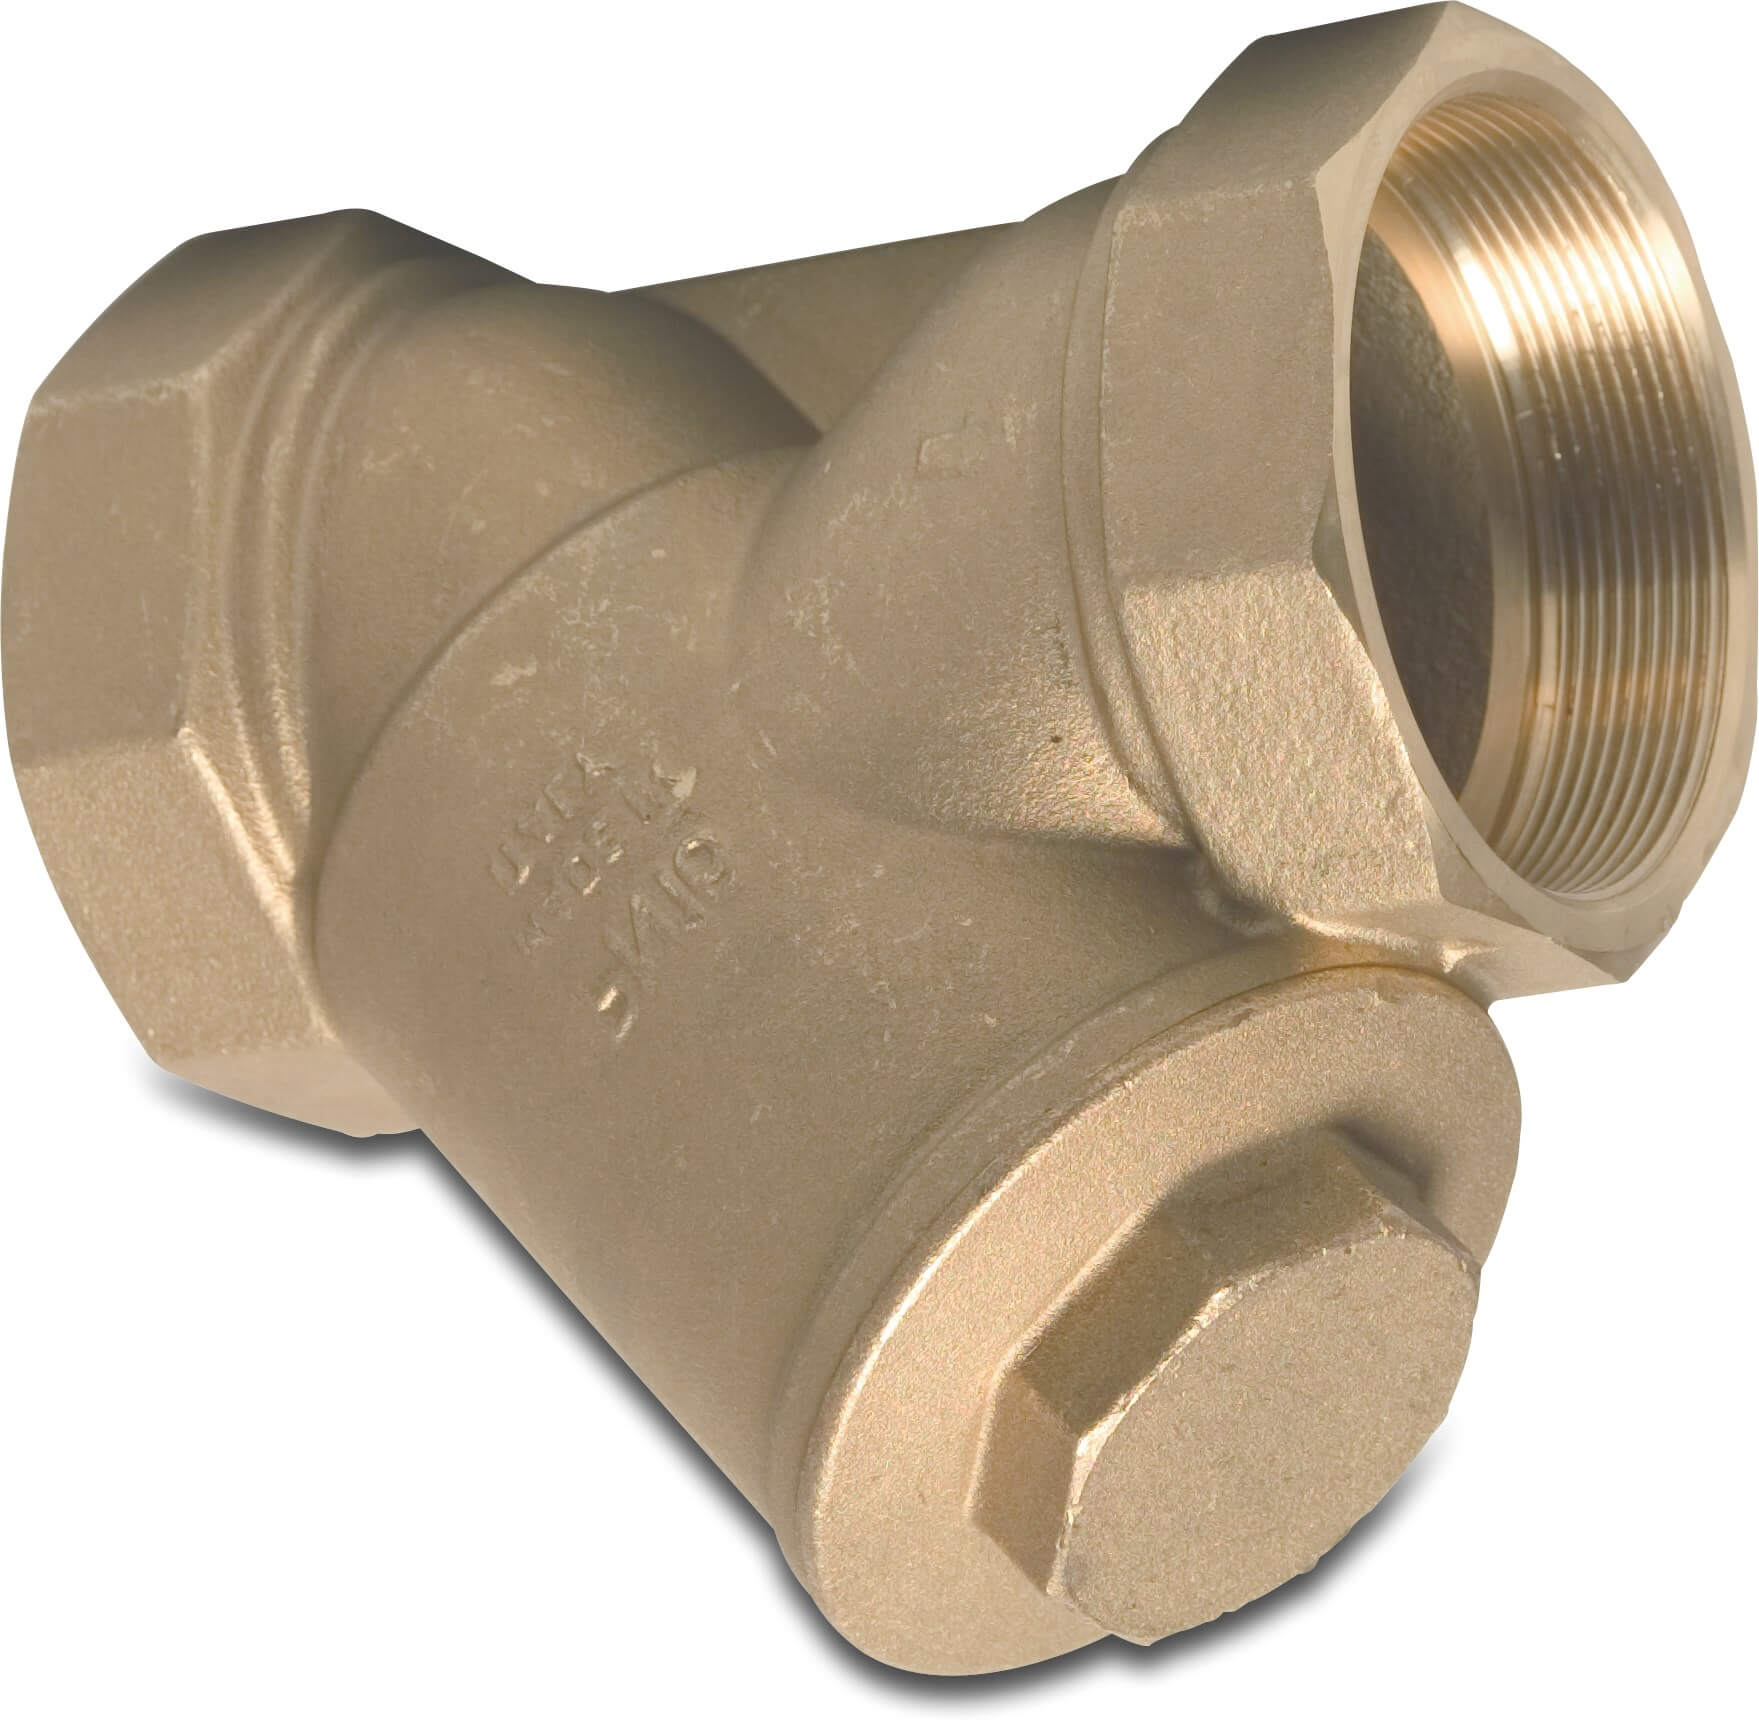 Profec In-line Filter brass 3/8" female thread 16bar 550micron stainless steel